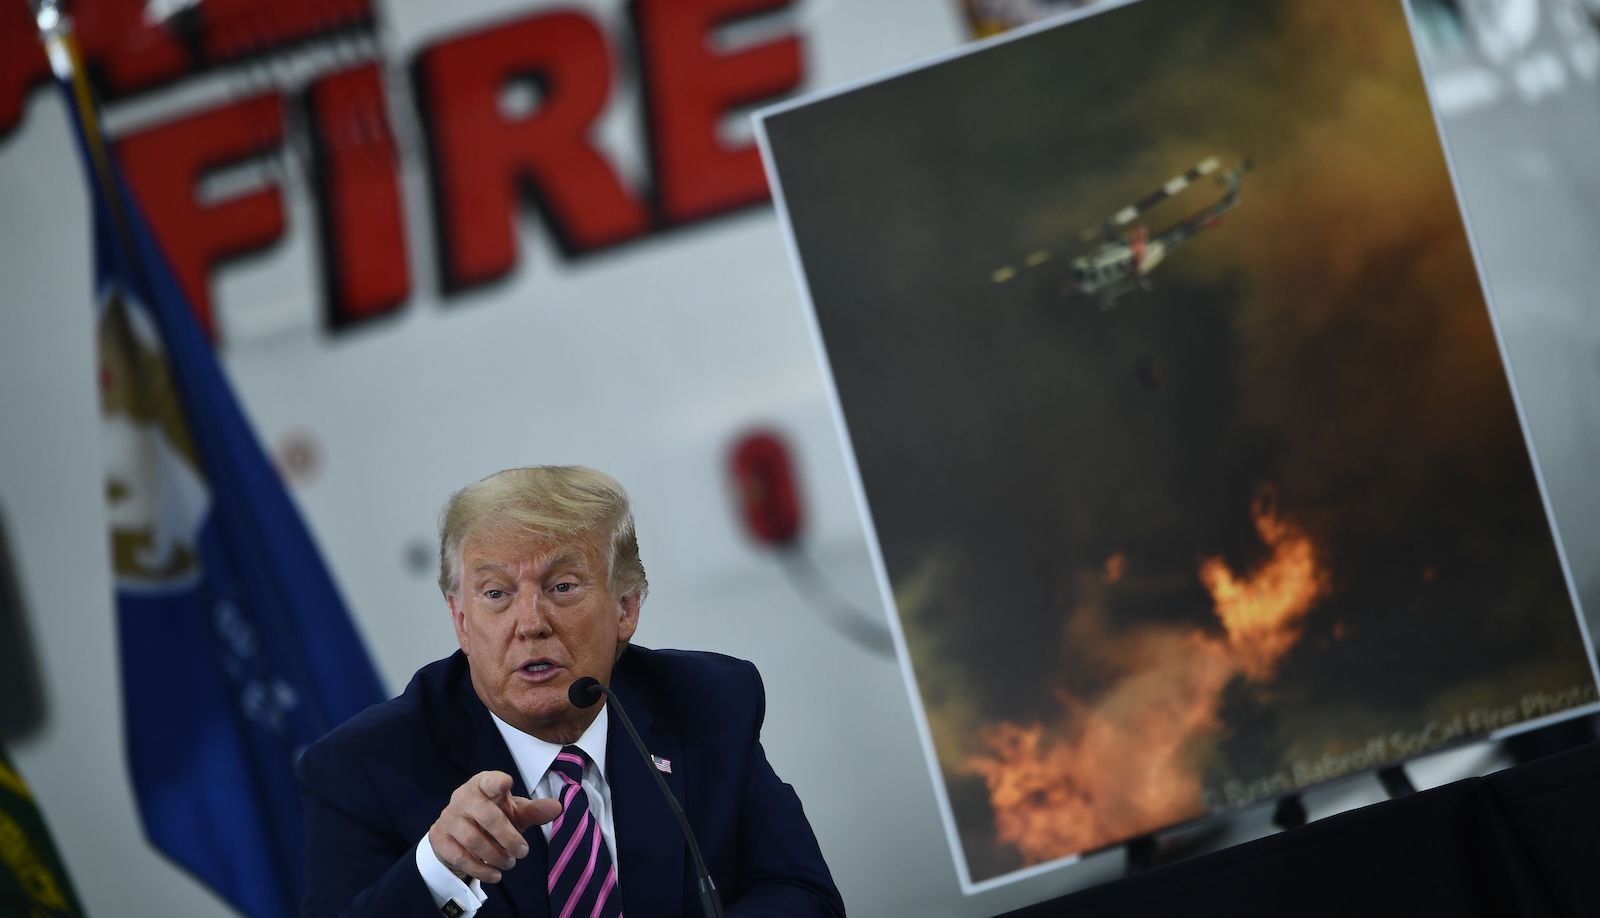 President Trump speaks at a meeting near Sacramento, California, after the state's wildfires.